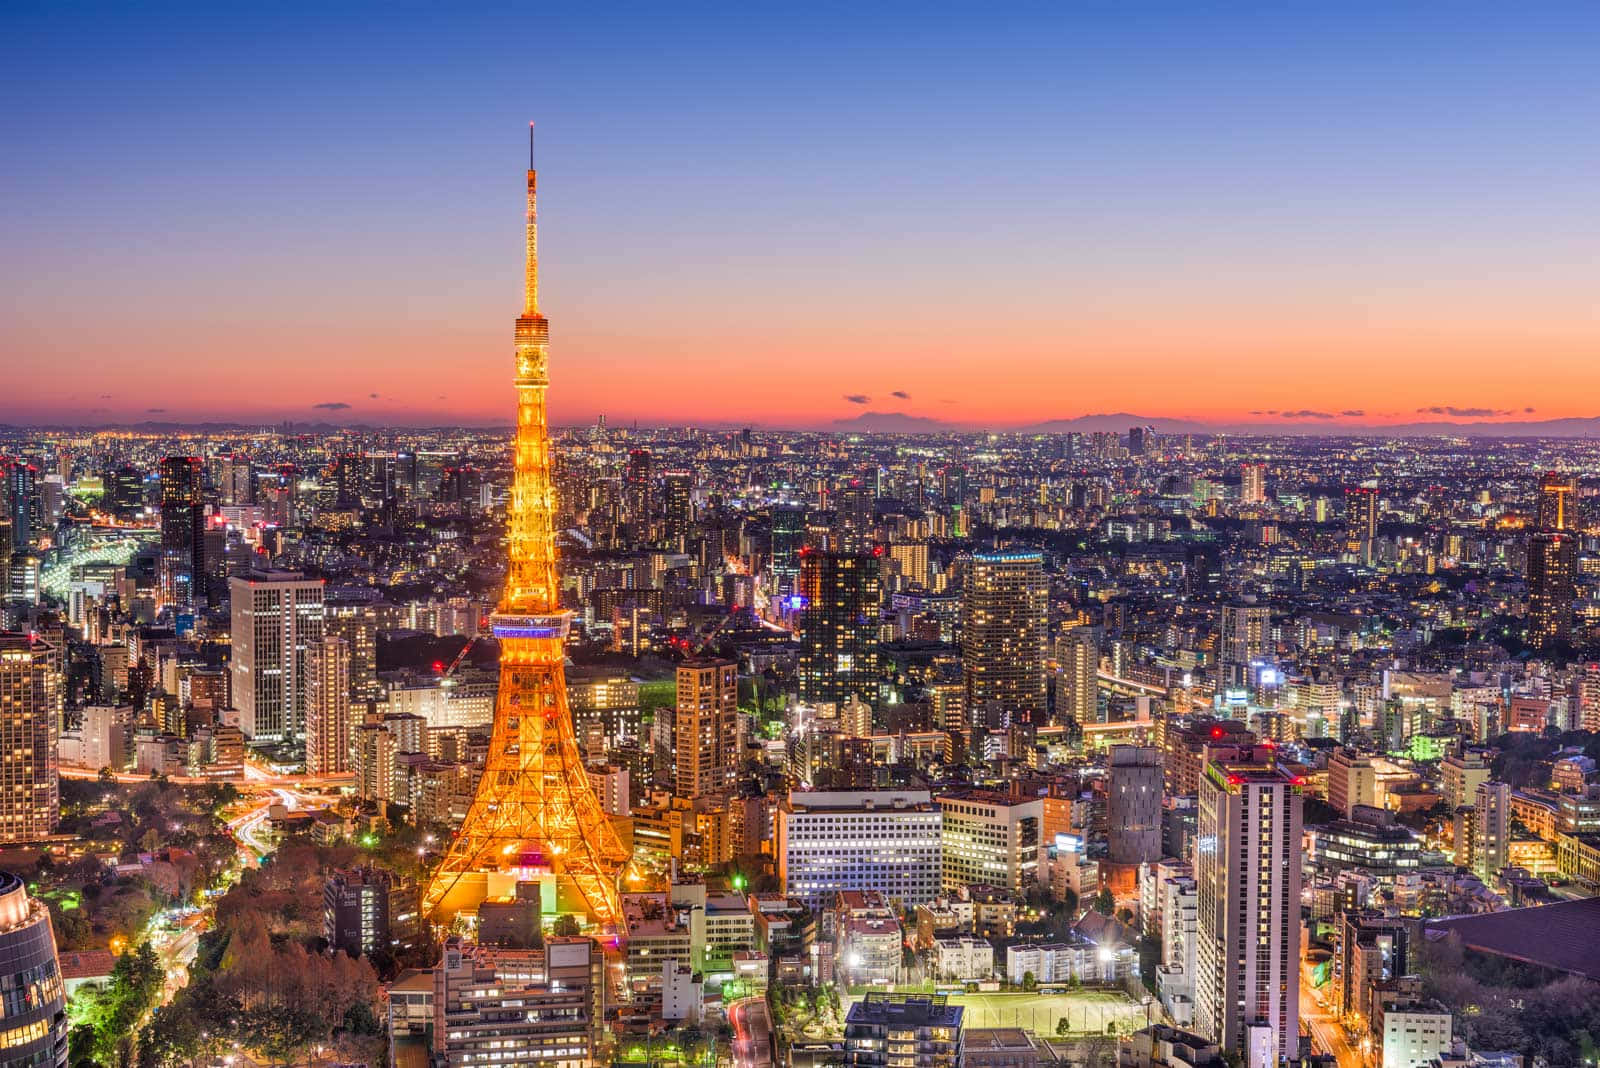 Tokyo Tower lights up the night sky in Japan